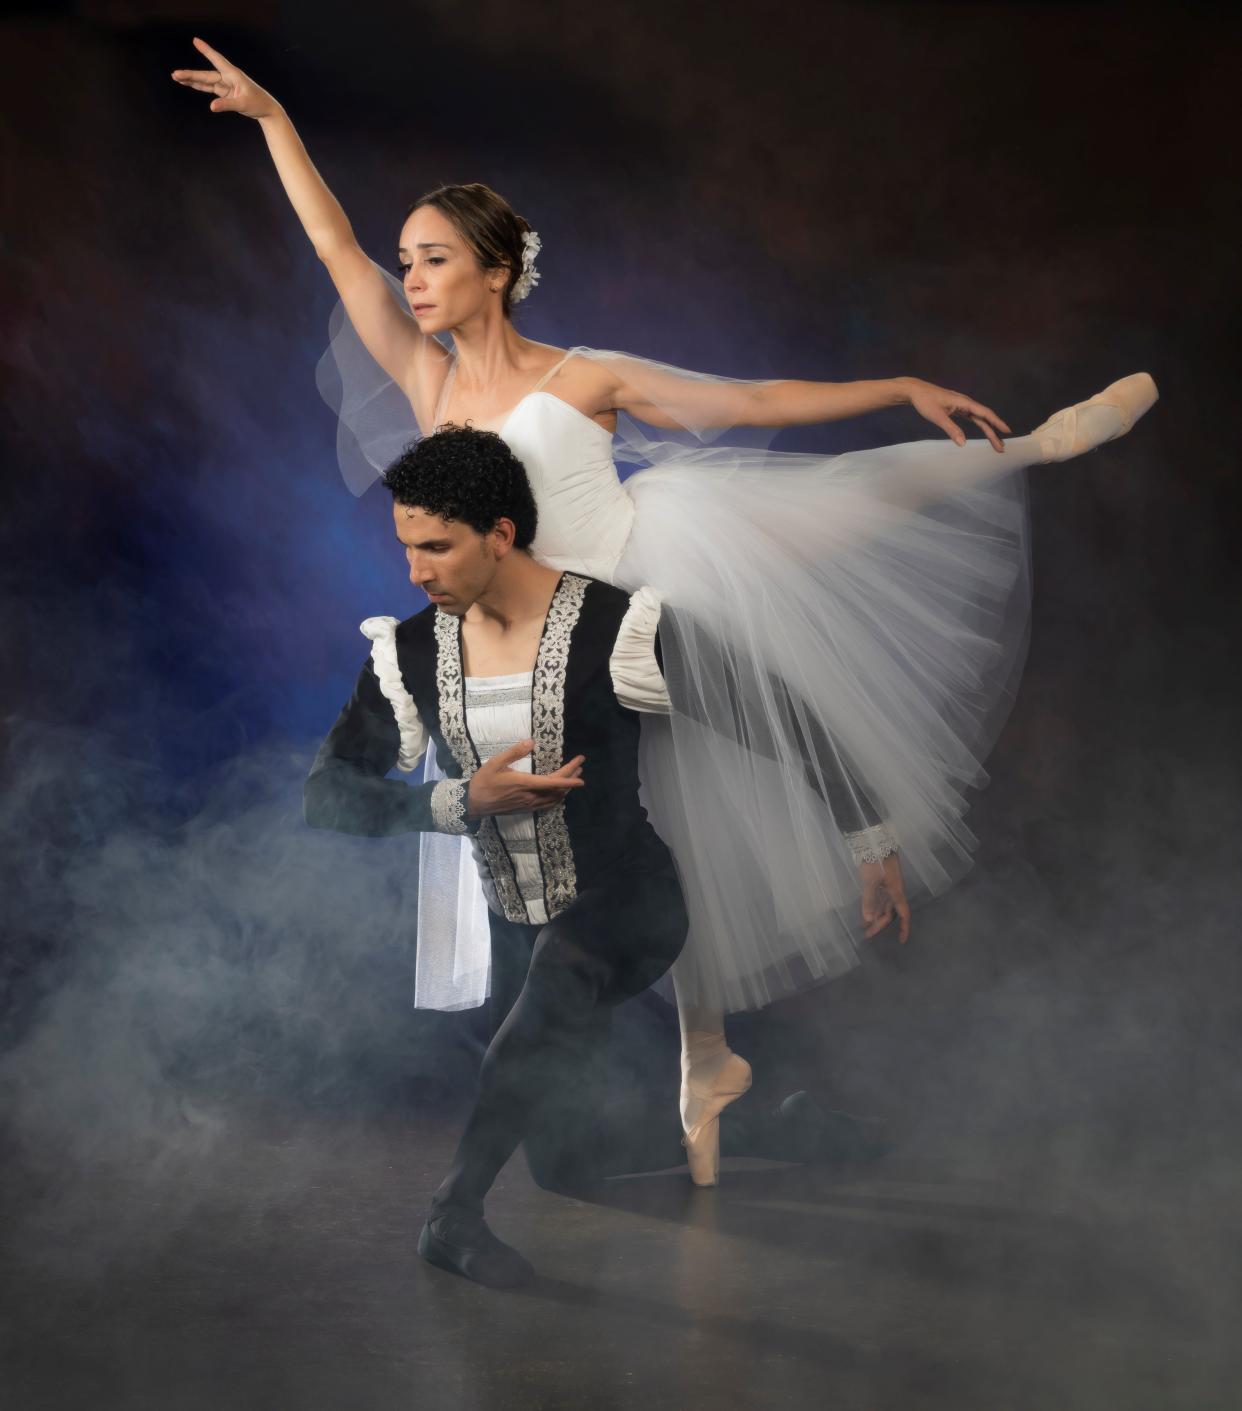 "Giselle" will be performed at 2 and 7:30 p.m. March 23 at the Phillips Center.